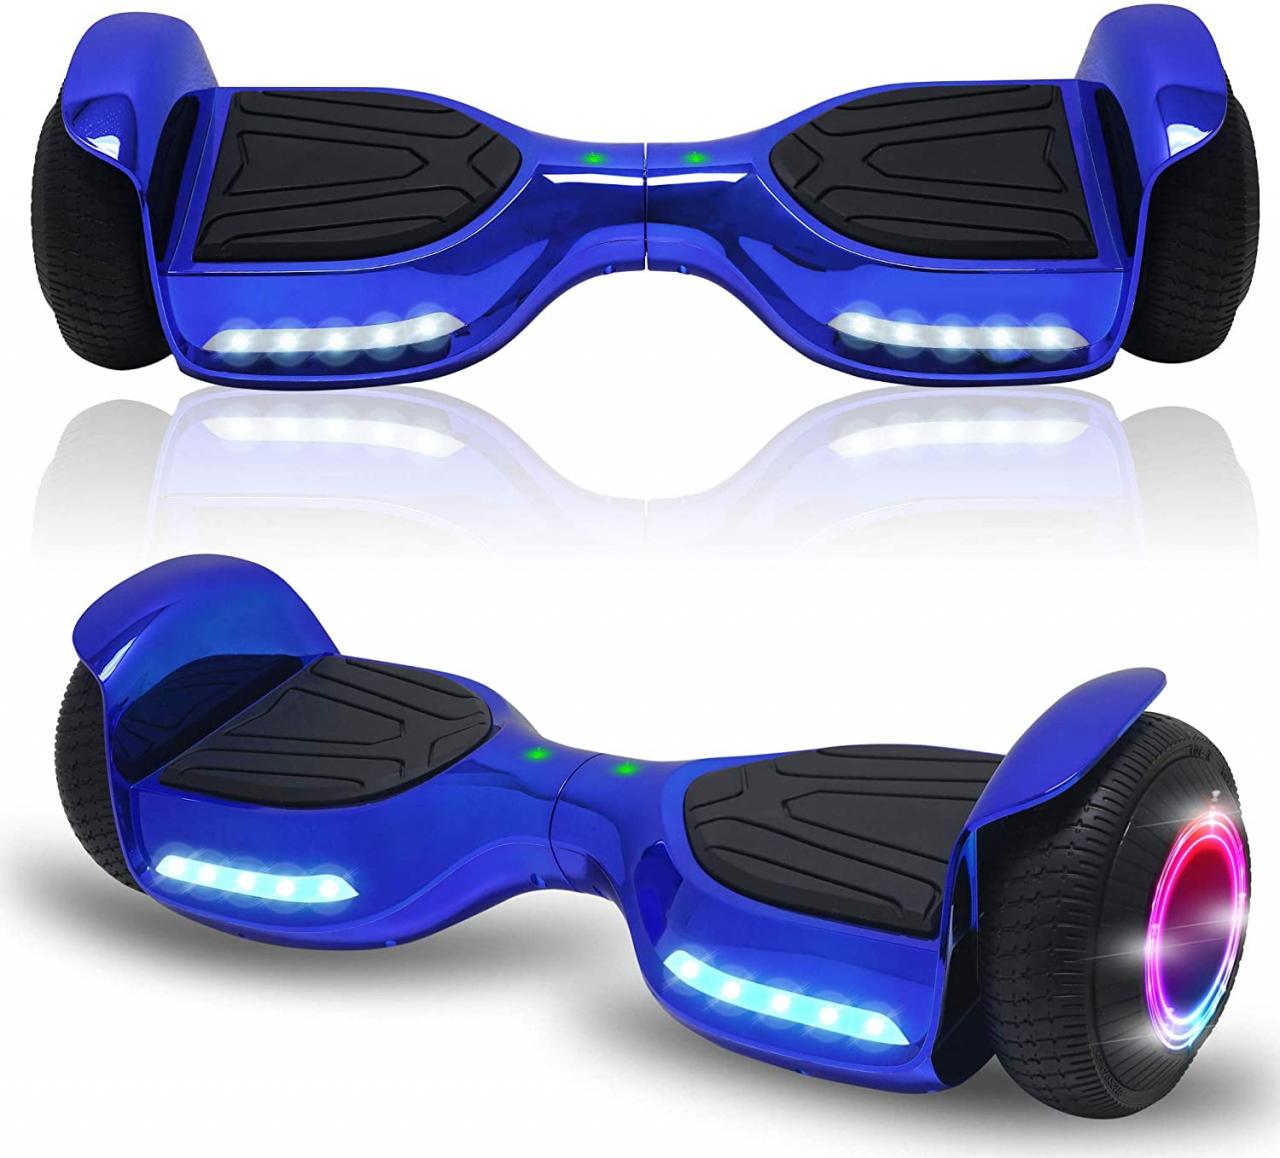 Buy Newest Generation Electric Hoverboard Dual Motors Two Wheels Hoover  Board Smart Self Balancing Scooter with Built-in Bluetooth Speaker LED  Lights for Adults Kids Gift Online in Vietnam. B07VS59SPJ